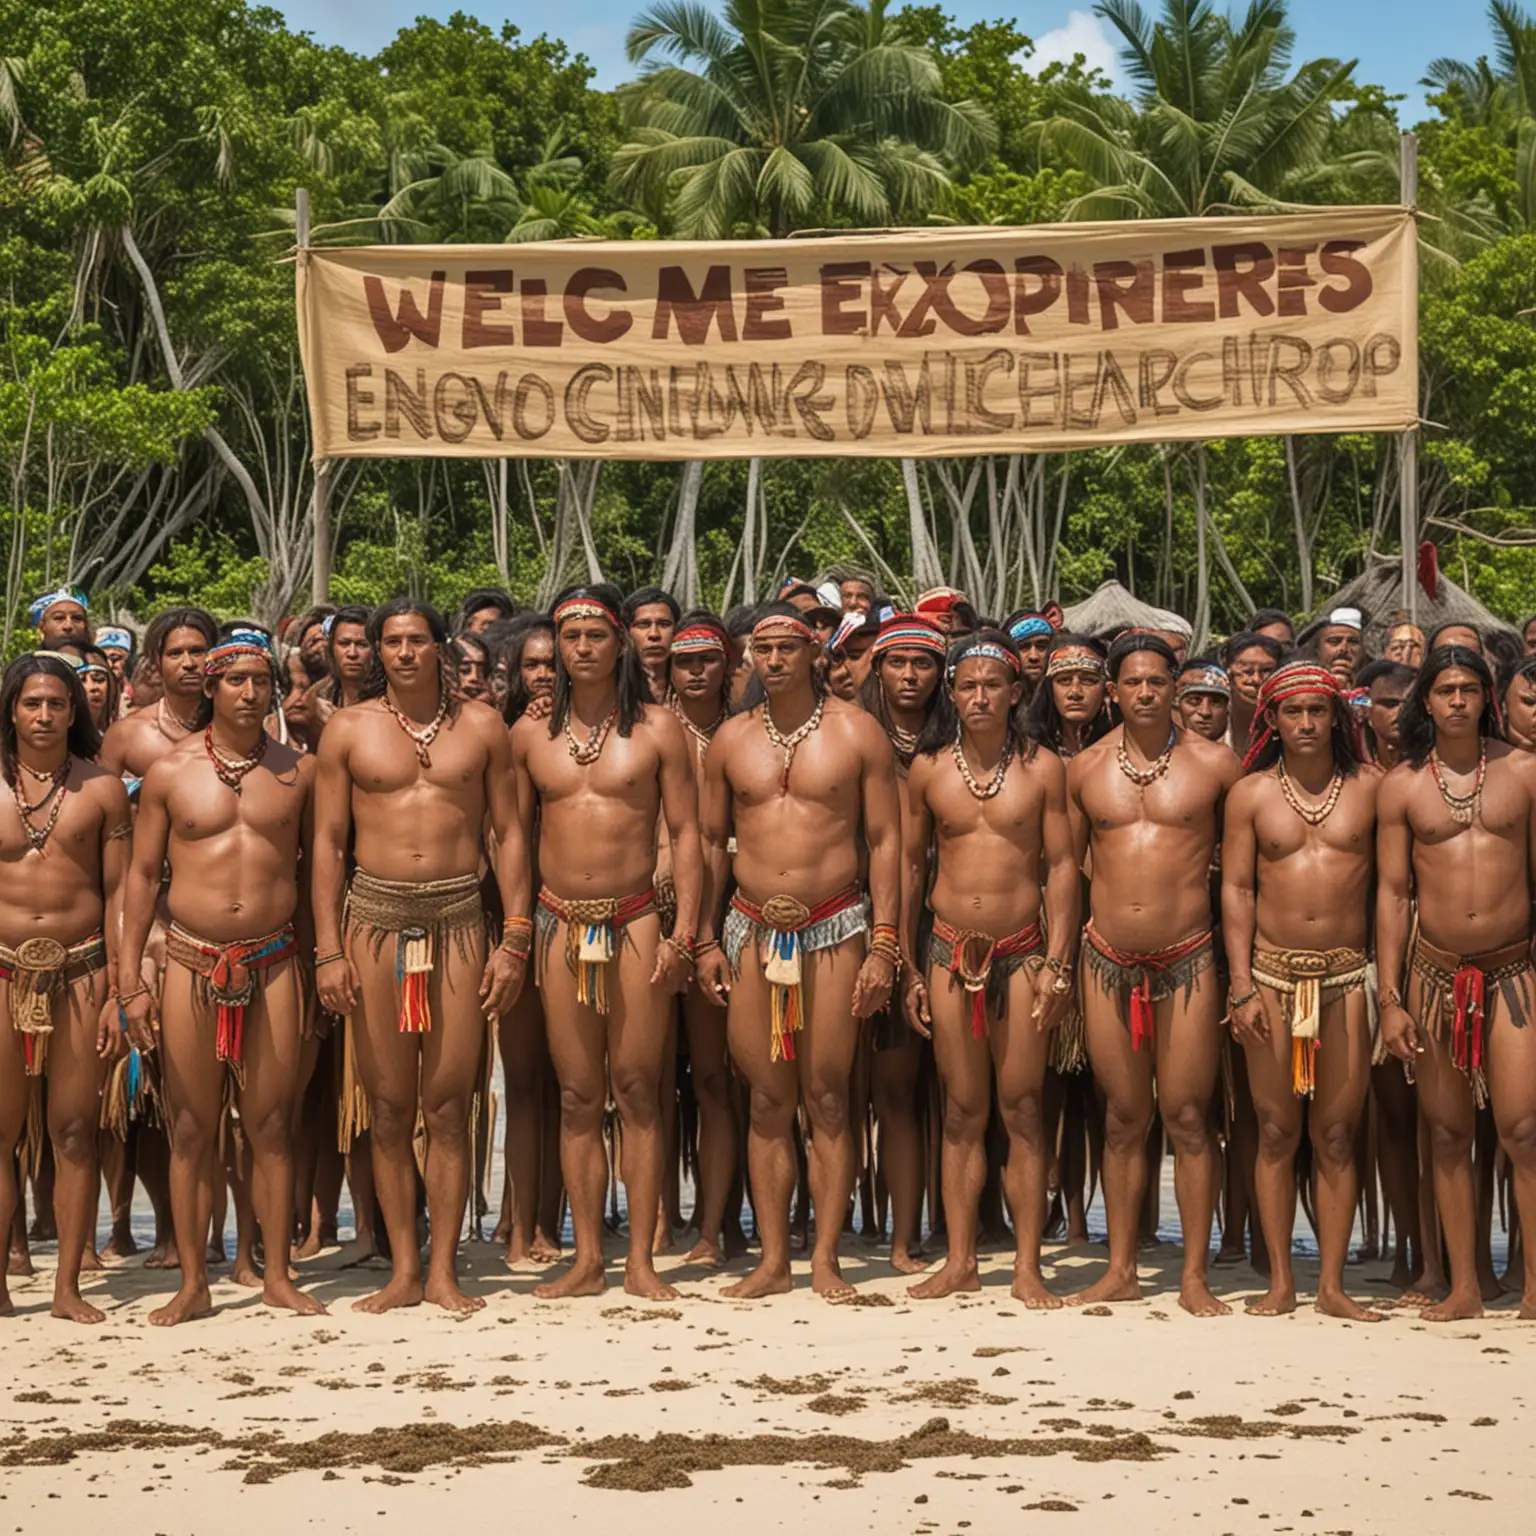 middle-sized crowd of native taino/arawak indians on a tropical beach, staring expectantly, eagerly out to sea, with a sign that says "welcome explorers"